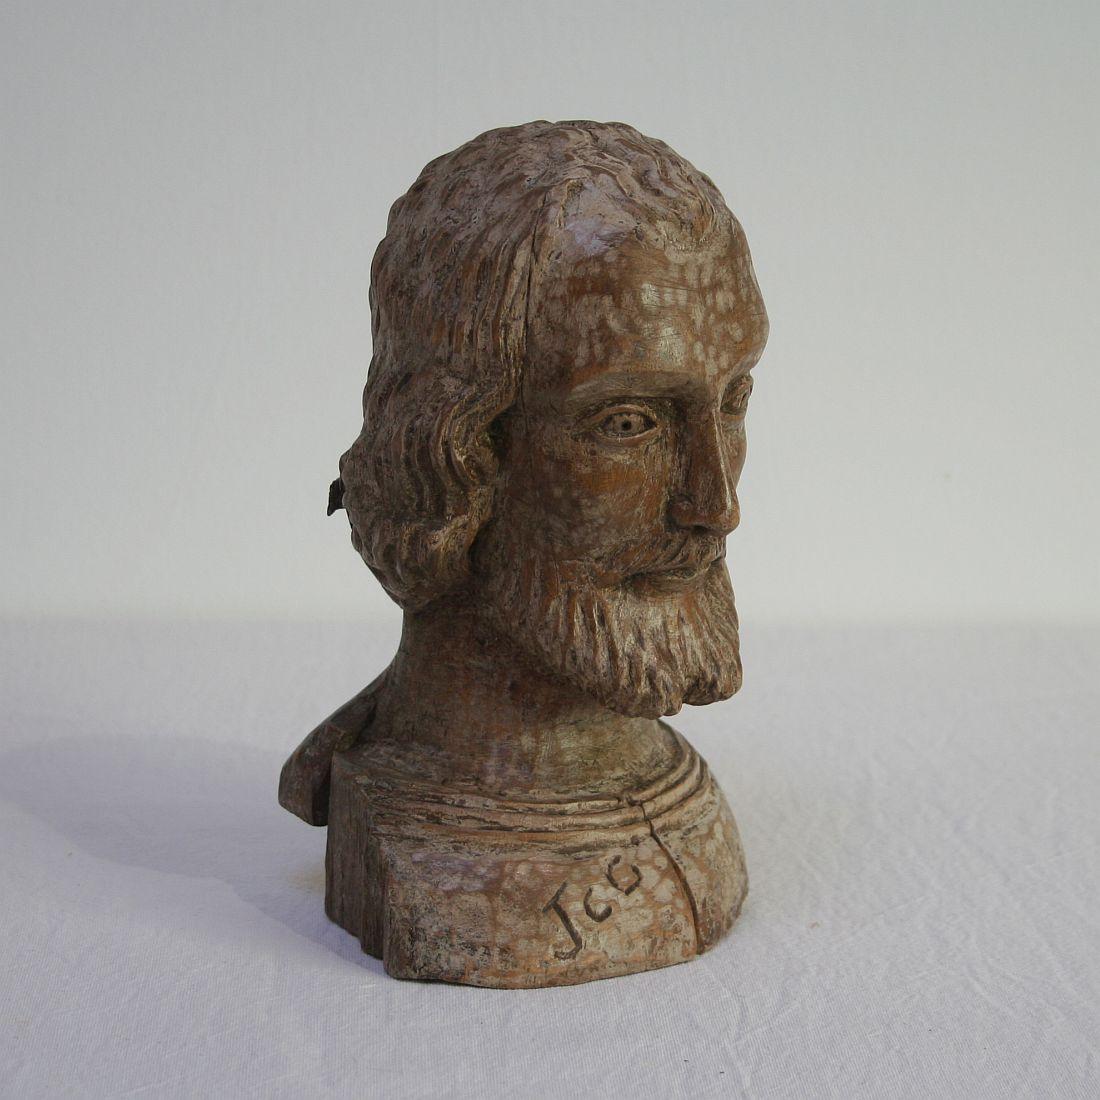 Hand-Carved Small 18th Century Spanish Reliquary Bust